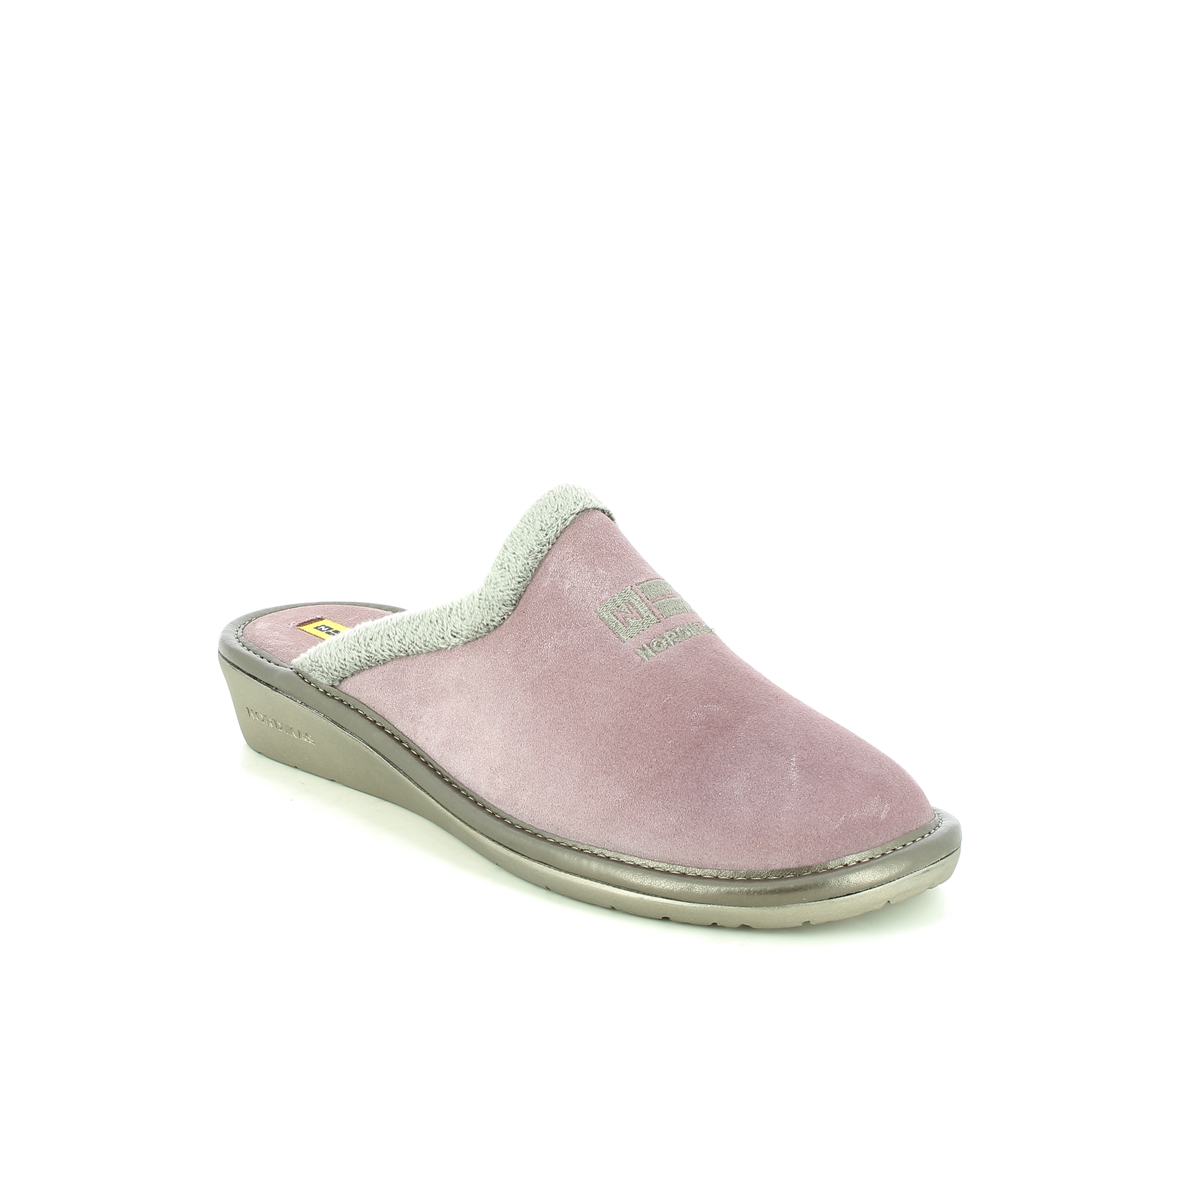 Nordikas Musue Pink Suede Womens Slipper Mules 238O-8   Natala 3 In Size 38 In Plain Pink Suede